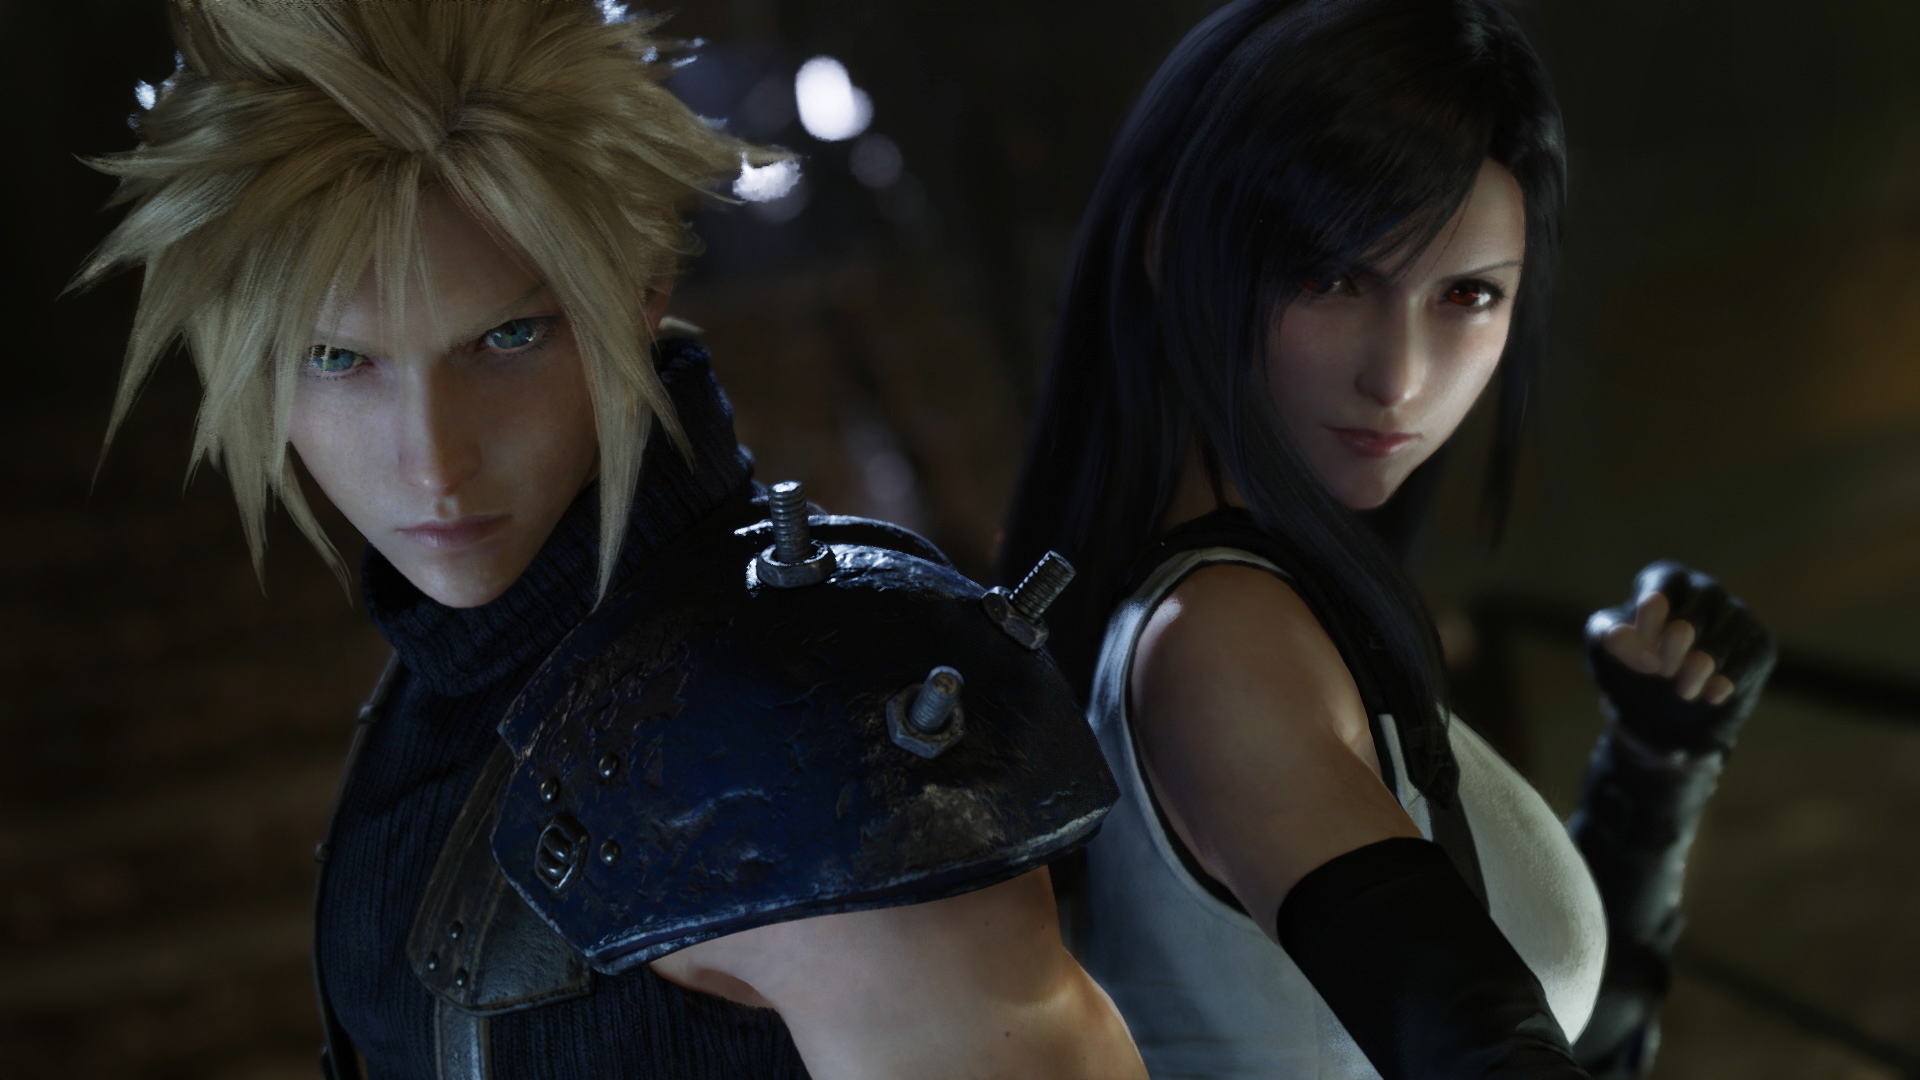 final fantasy: Final Fantasy 7 Rebirth: Here's release date, platforms,  storyline, gameplay, characters and more - The Economic Times